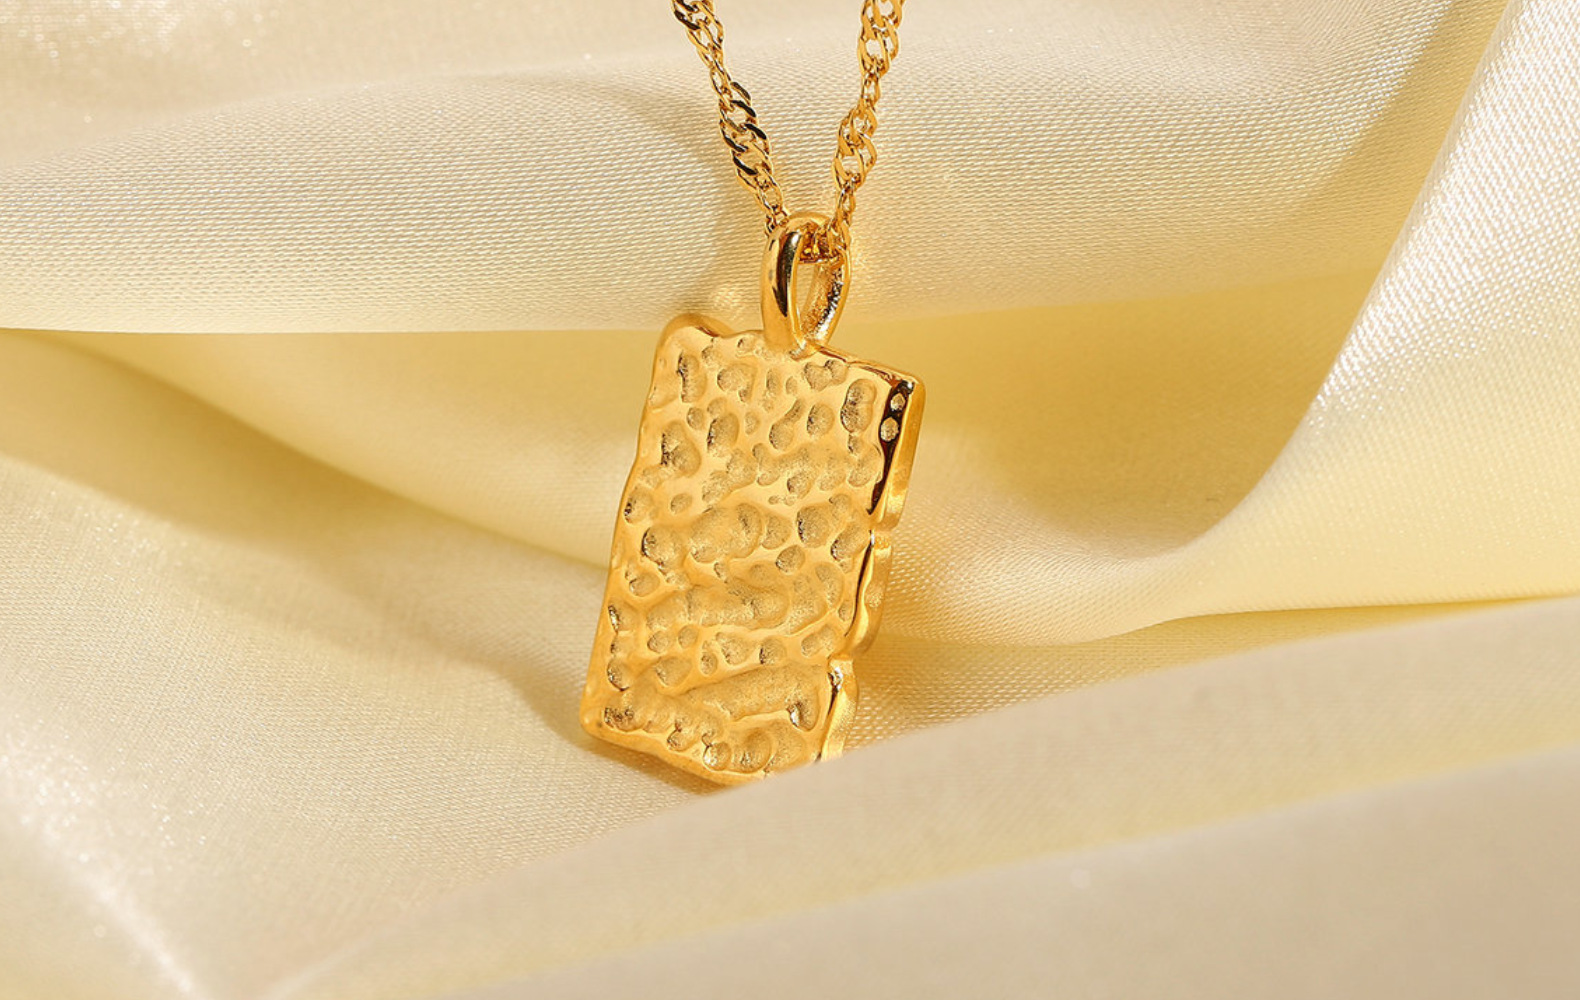 vintage bump pendant square goldplated stainless steel necklacepicture4